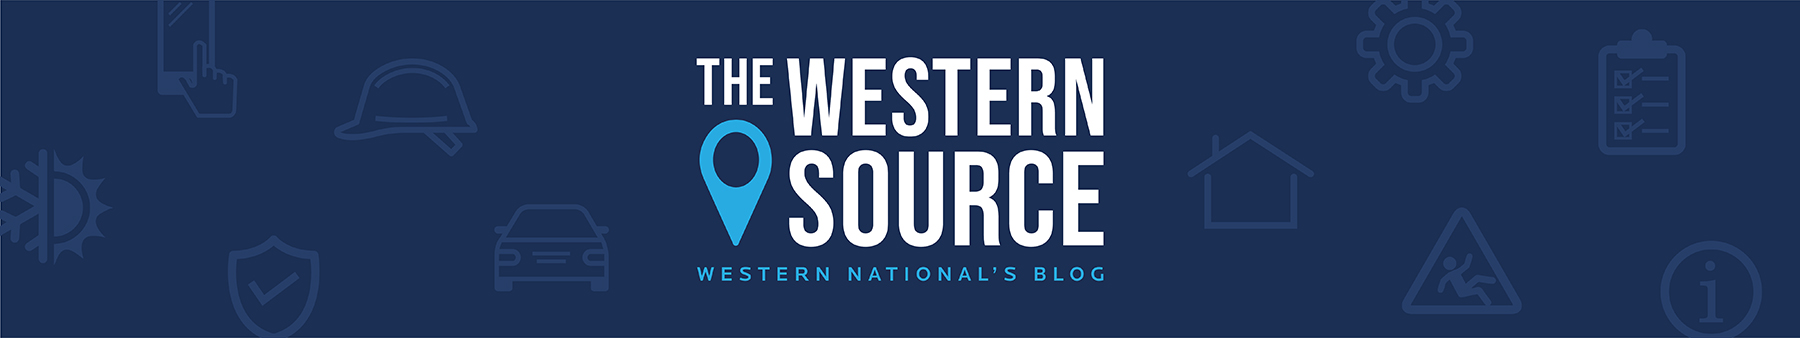 The Western Source - Western National's Blog